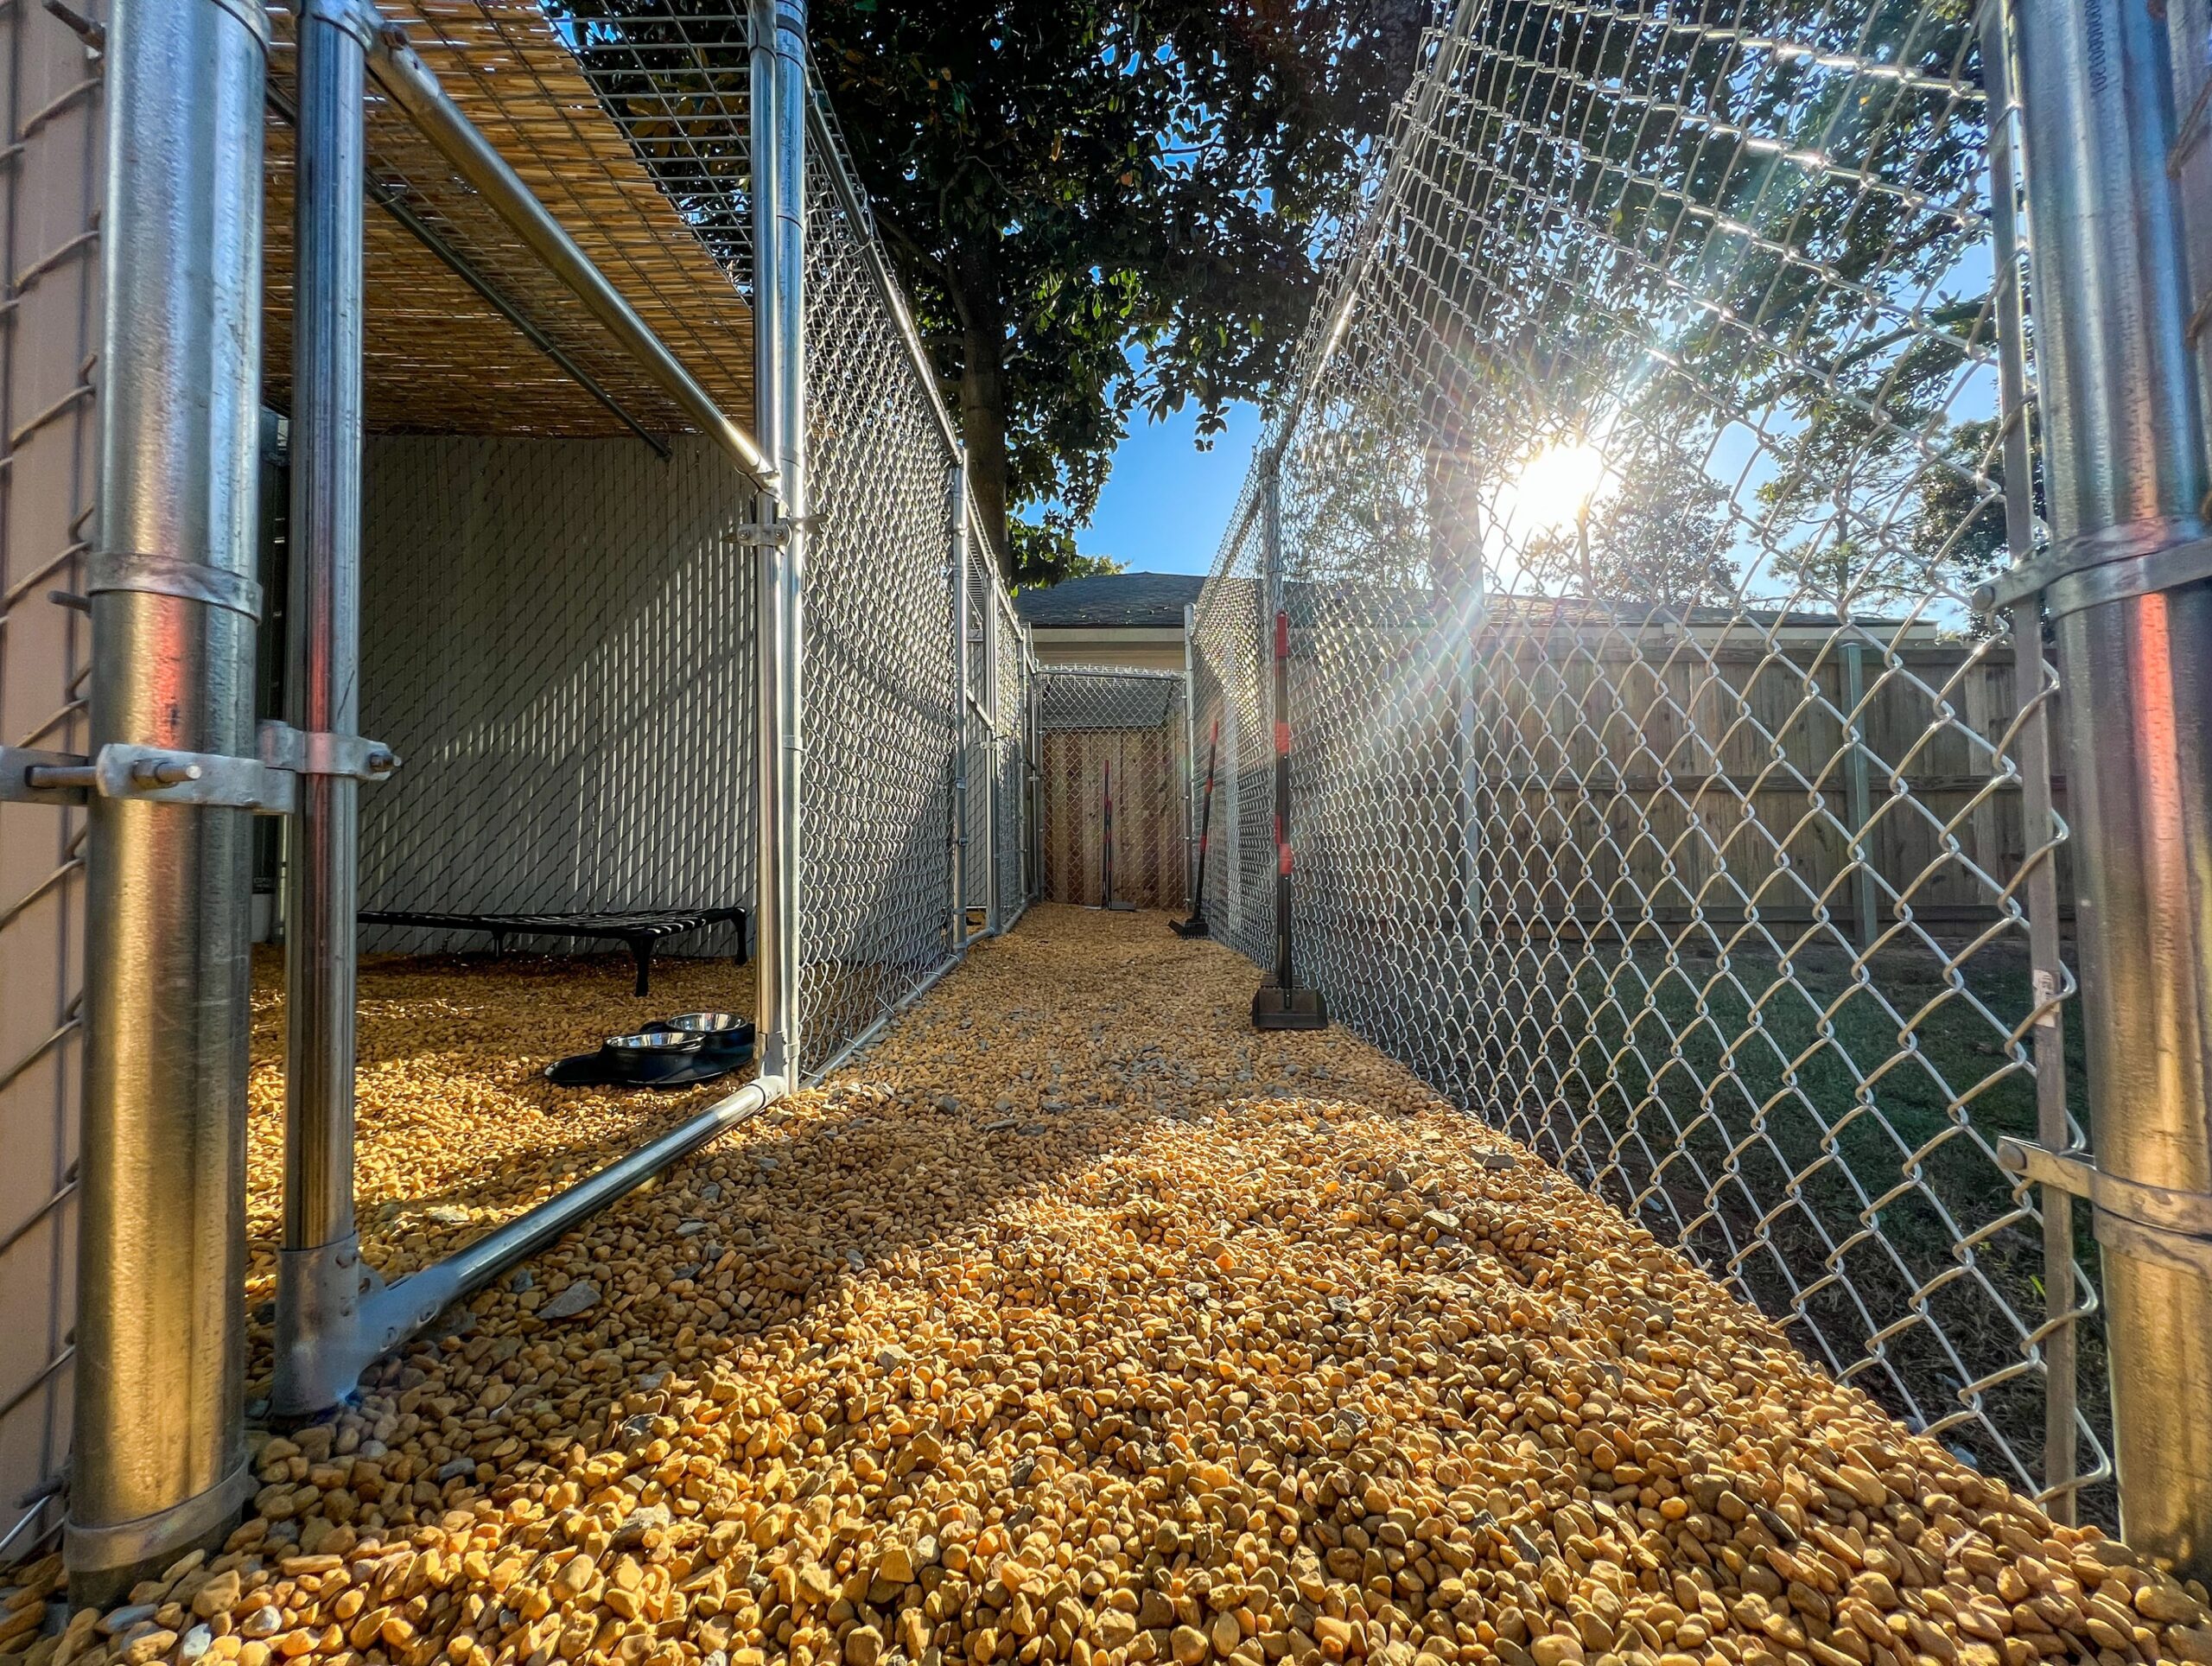 The sun shines brightly through a newly installed chain link fence.